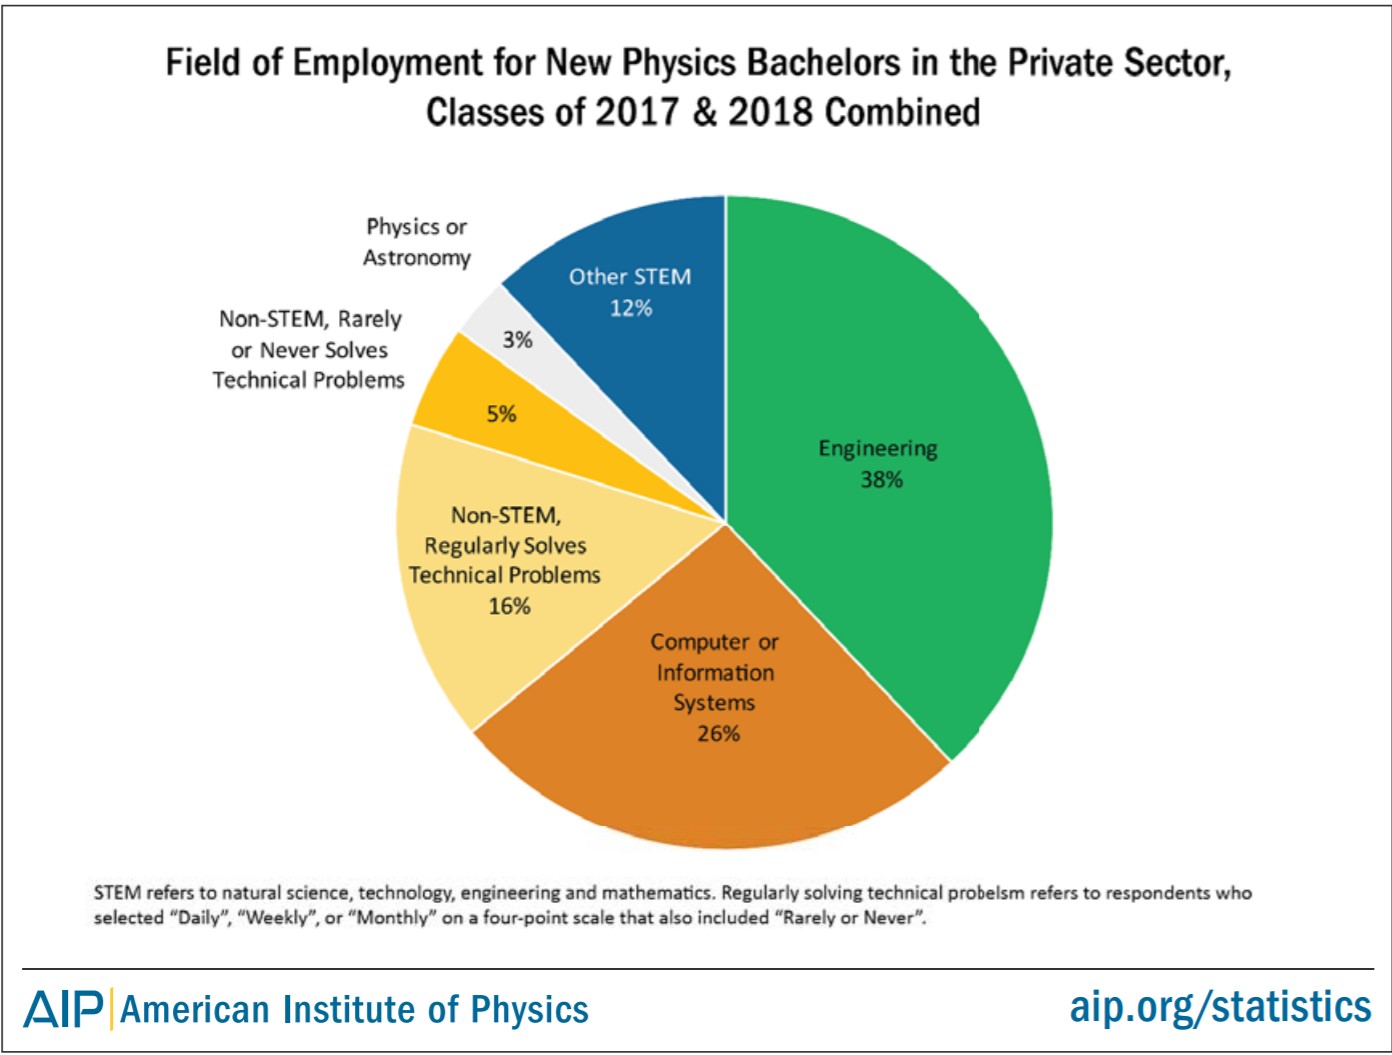 physics bachelors private sector fields